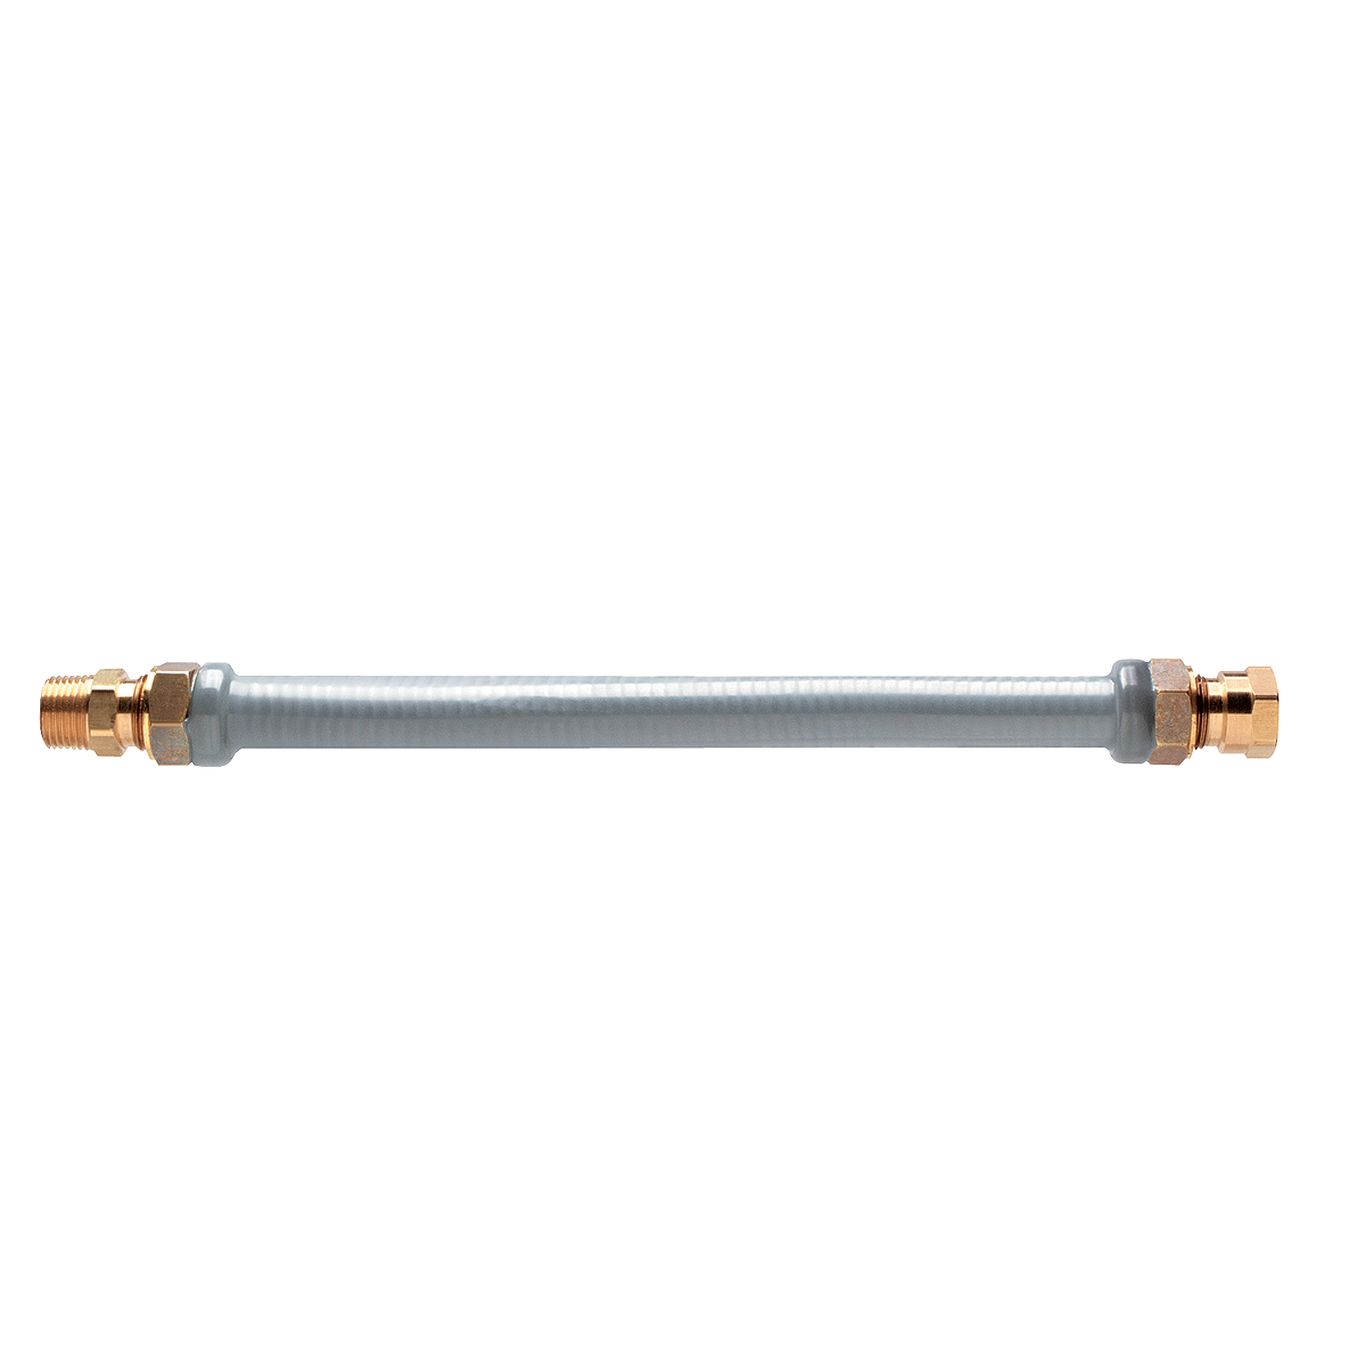 Gas Connector, 1/2 Inch Inner Dia., 1/2 Inch x 1/2 Inch Size, 48 Inch Length